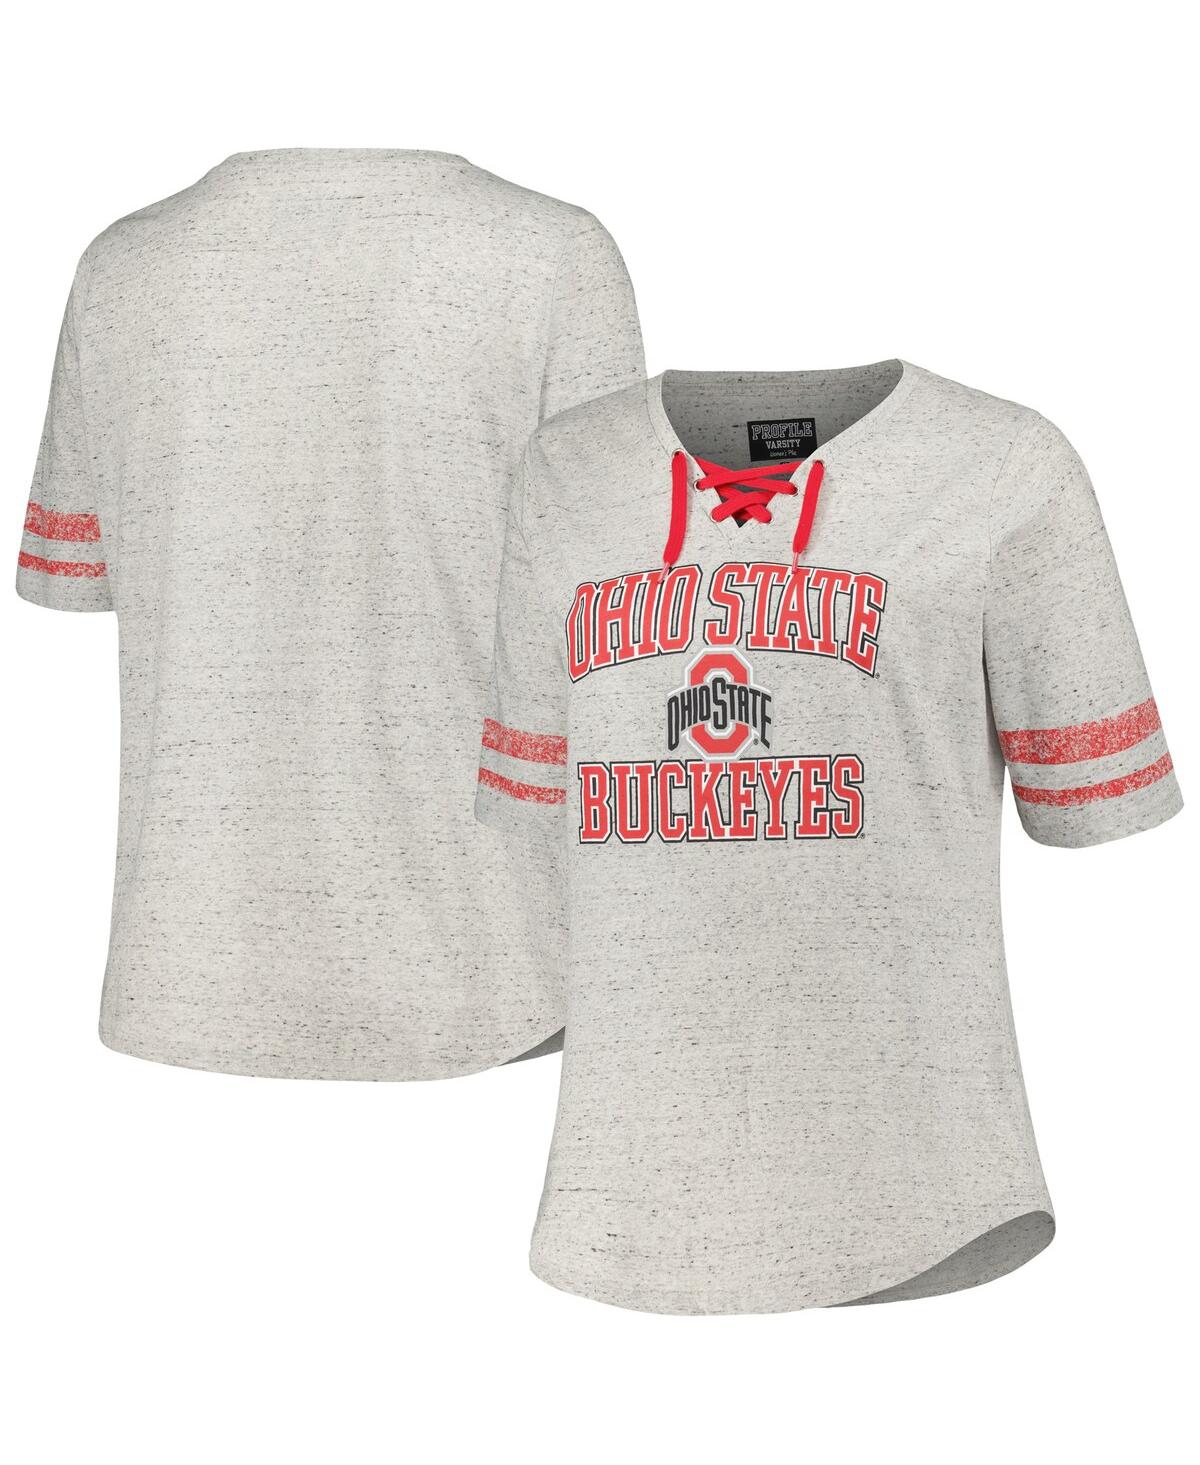 Women's Profile Heather Gray Ohio State Buckeyes Plus Size Striped Lace-Up T-shirt - Heather Gray